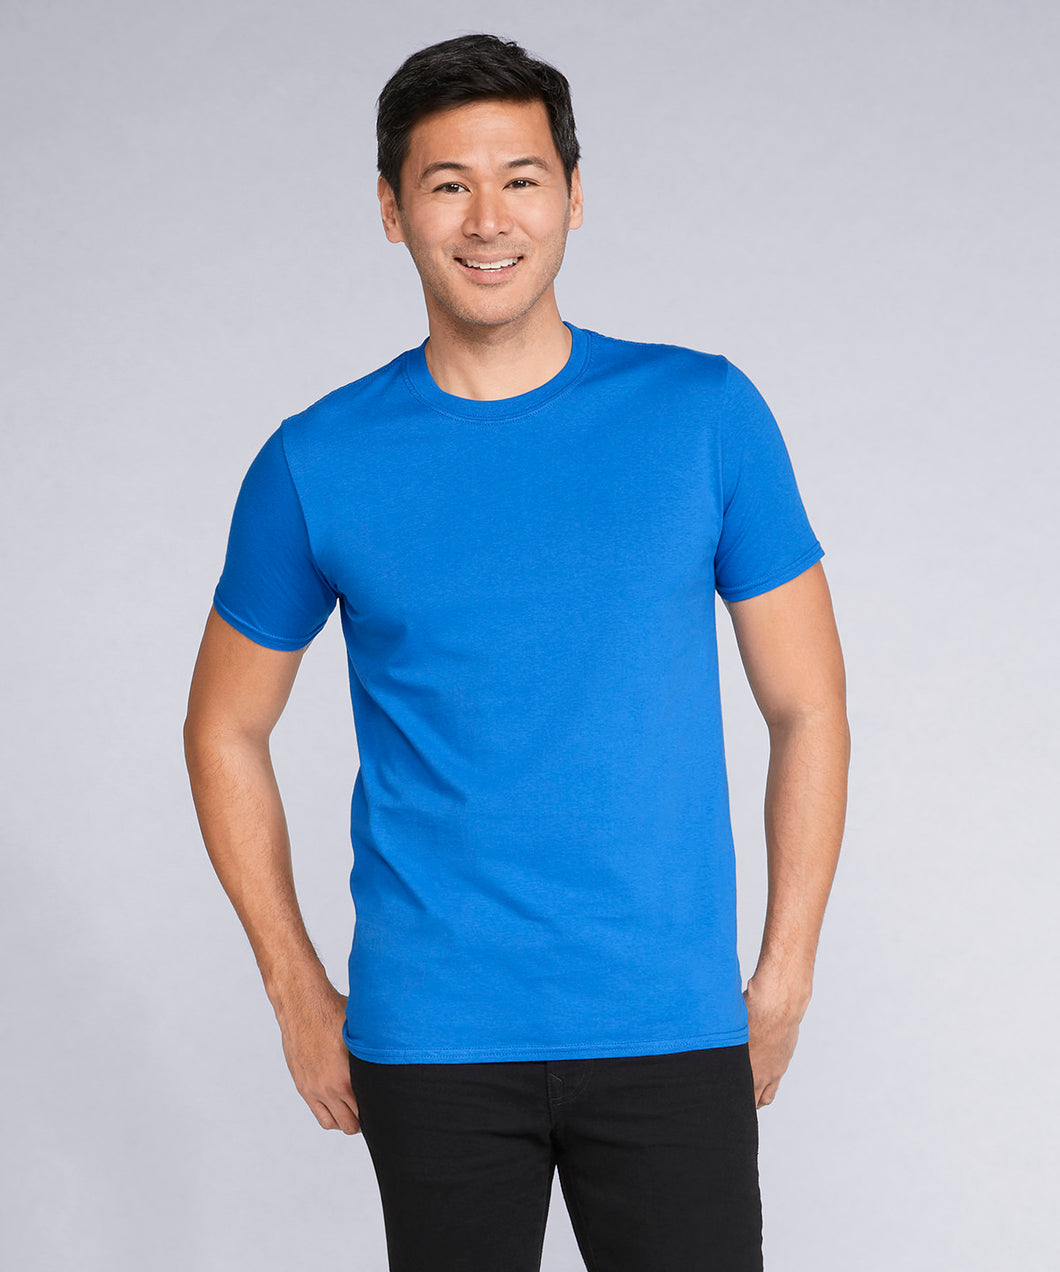 Embroidered - Adult Cotton ringspun t-shirt